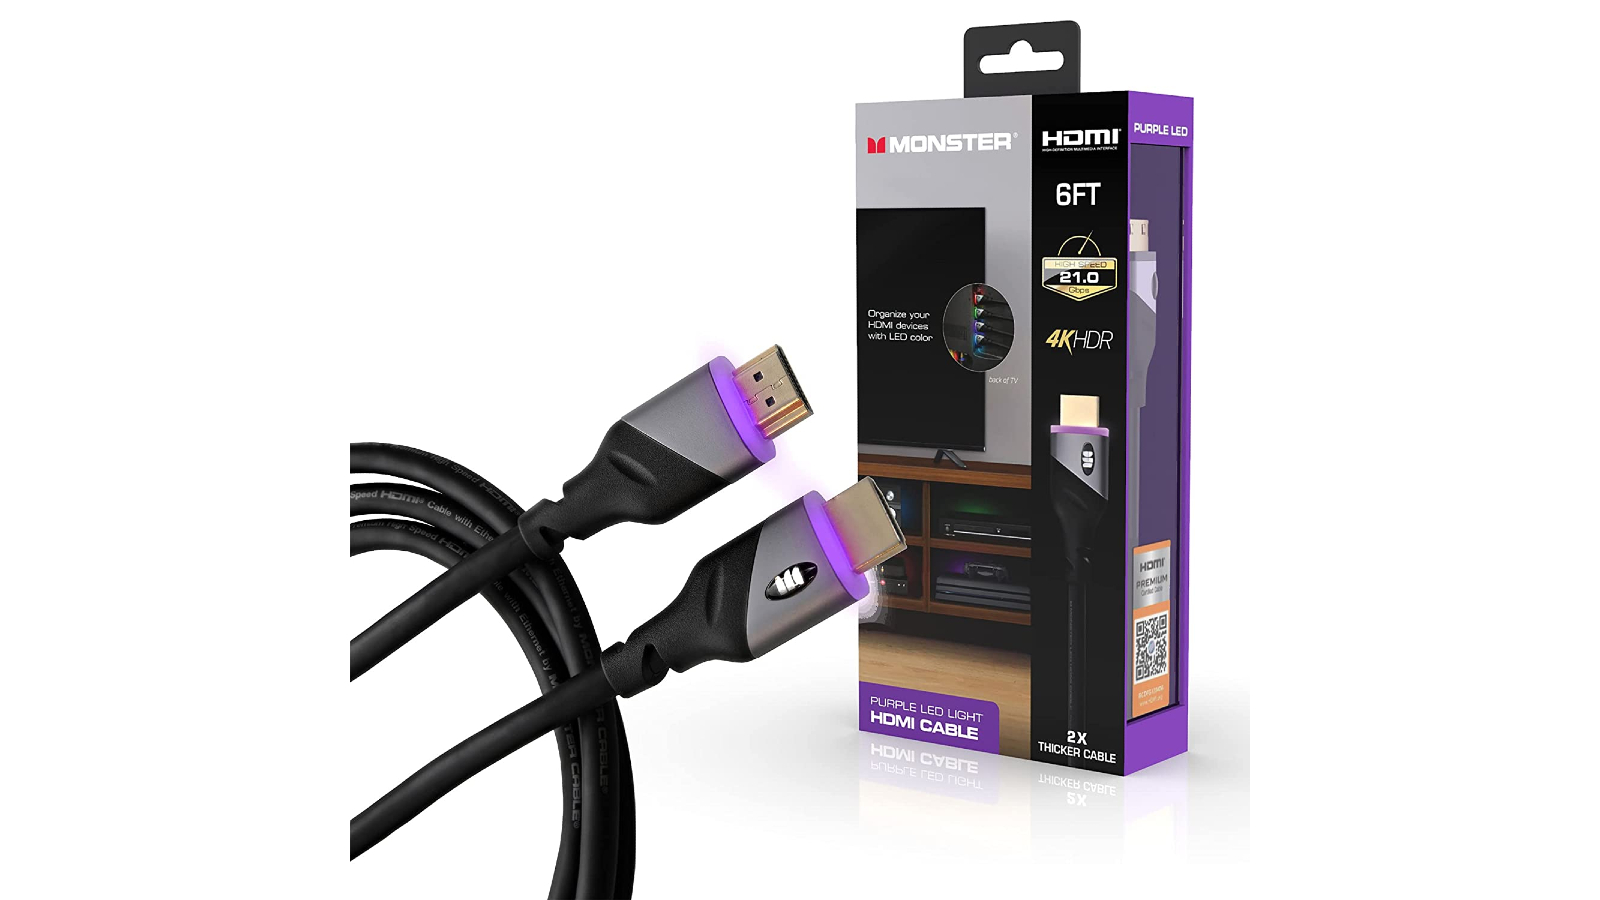 Monster HDMI Cable with built-in LED light - Best HDMI for cable management